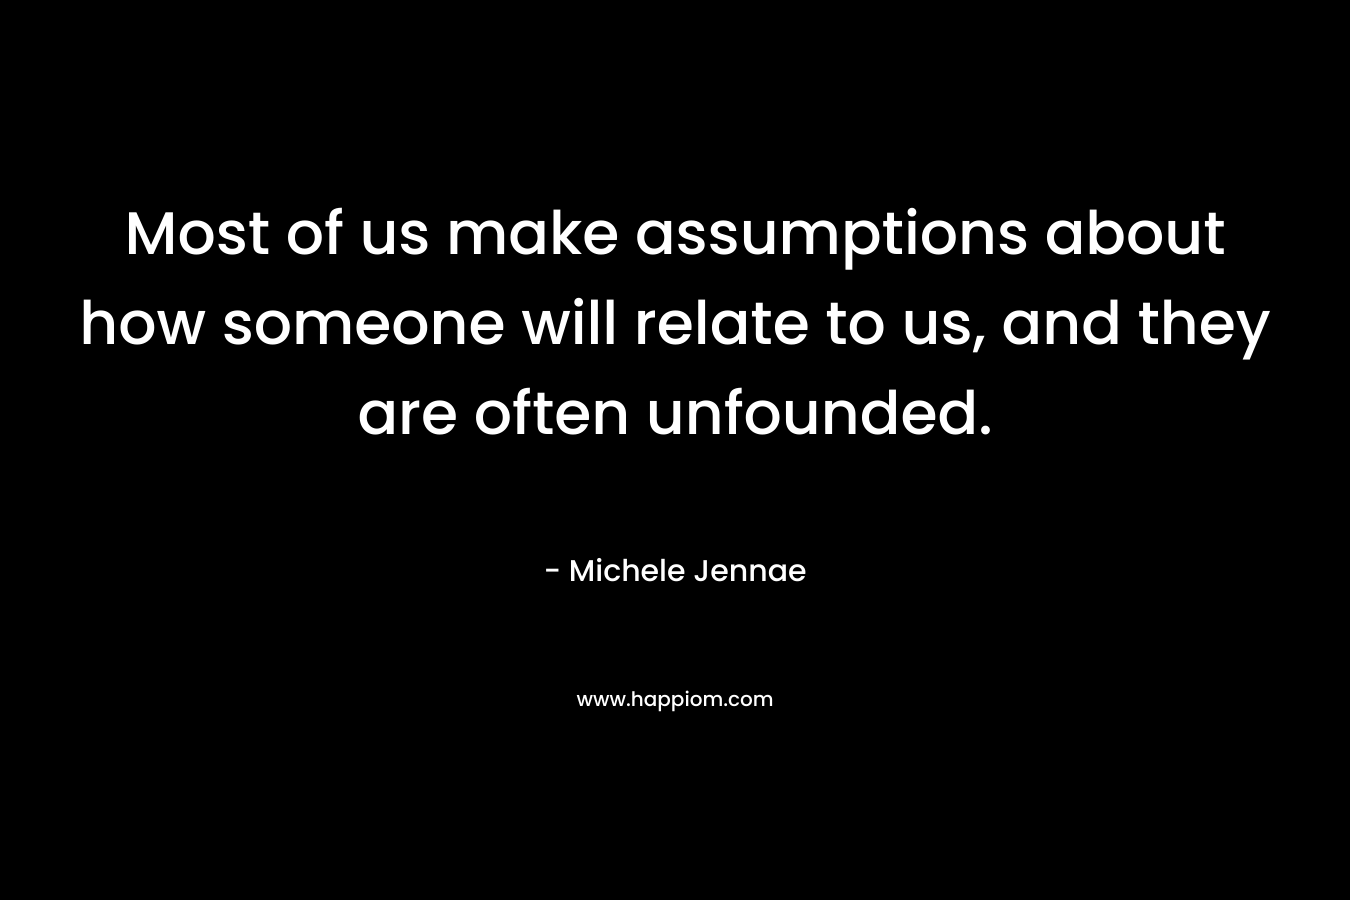 Most of us make assumptions about how someone will relate to us, and they are often unfounded.